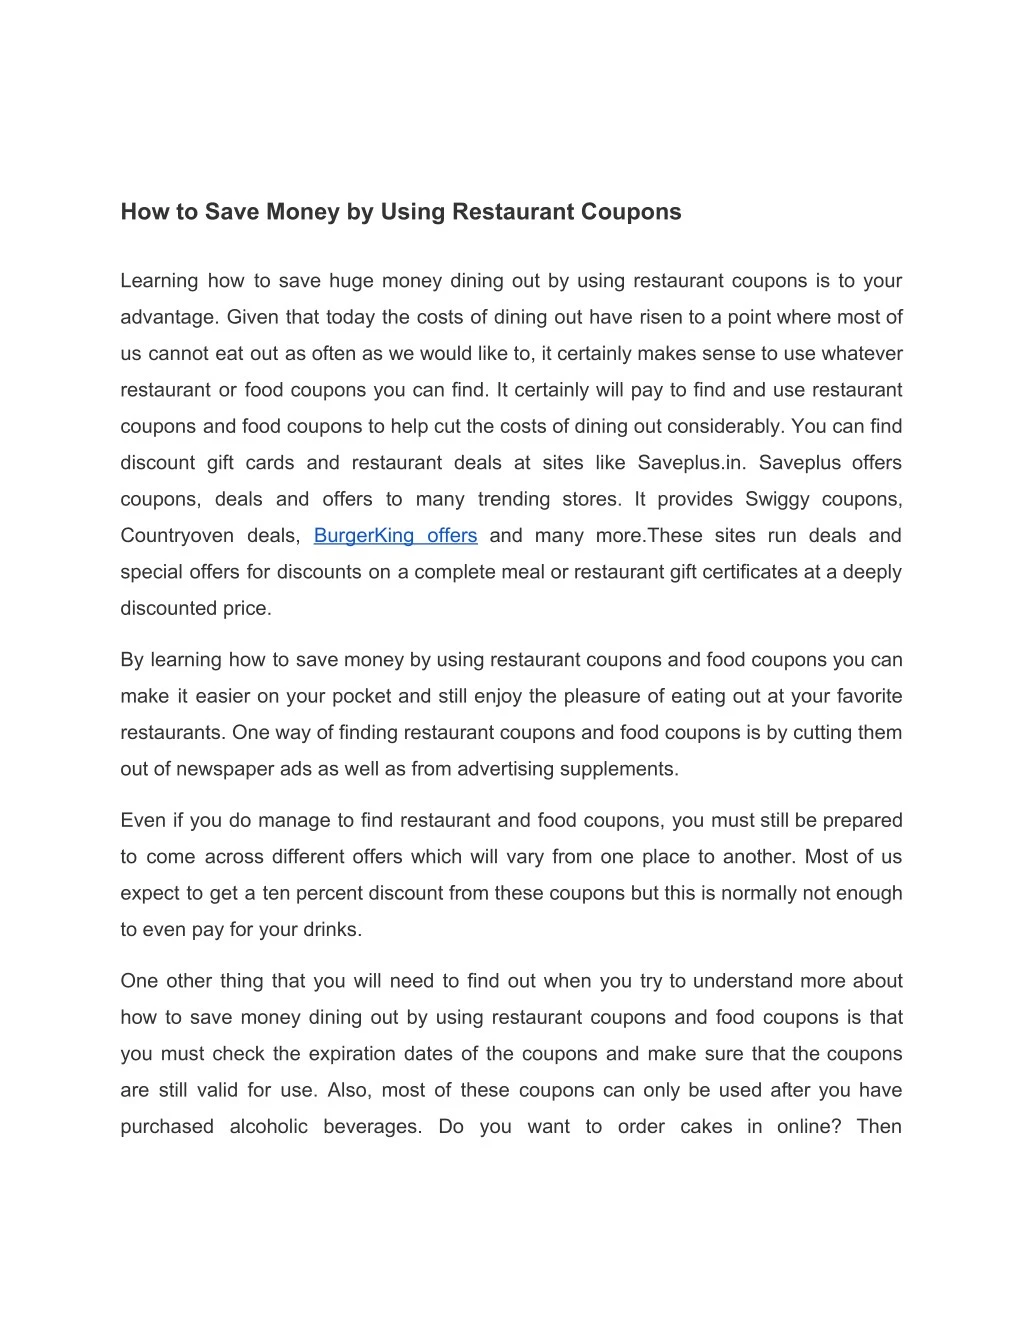 how to save money by using restaurant coupons